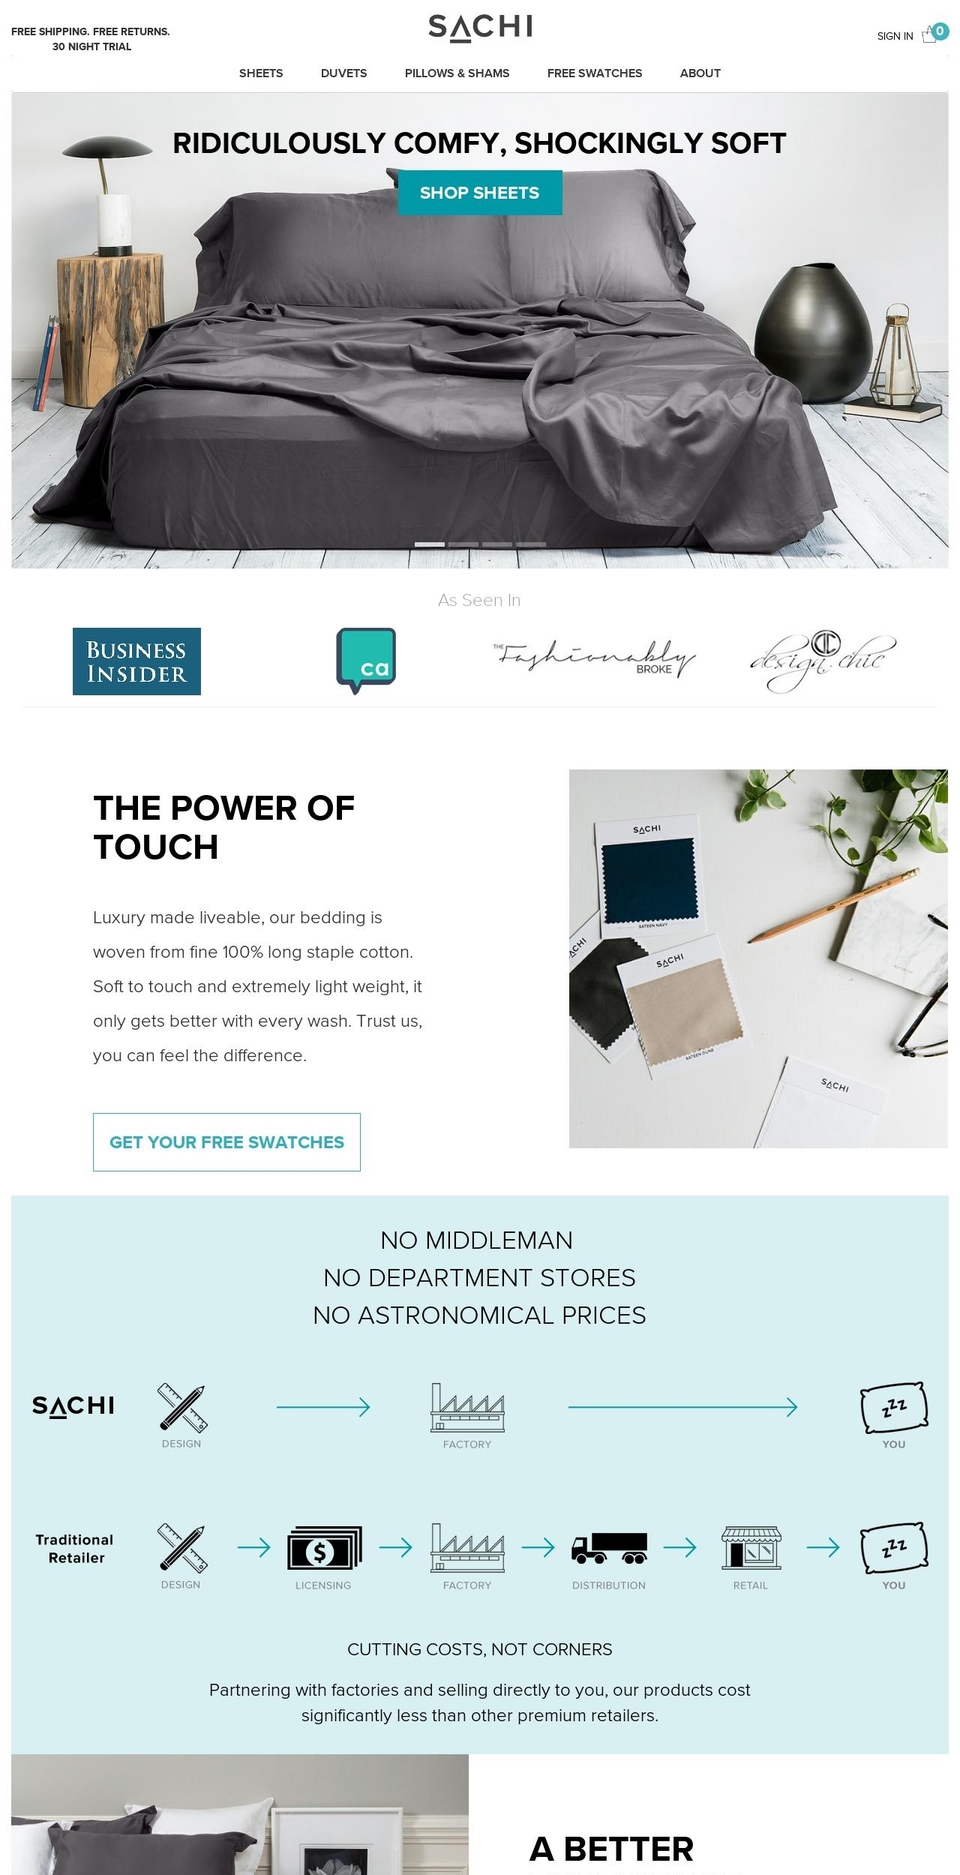 Timber Shopify theme site example sachihome.com